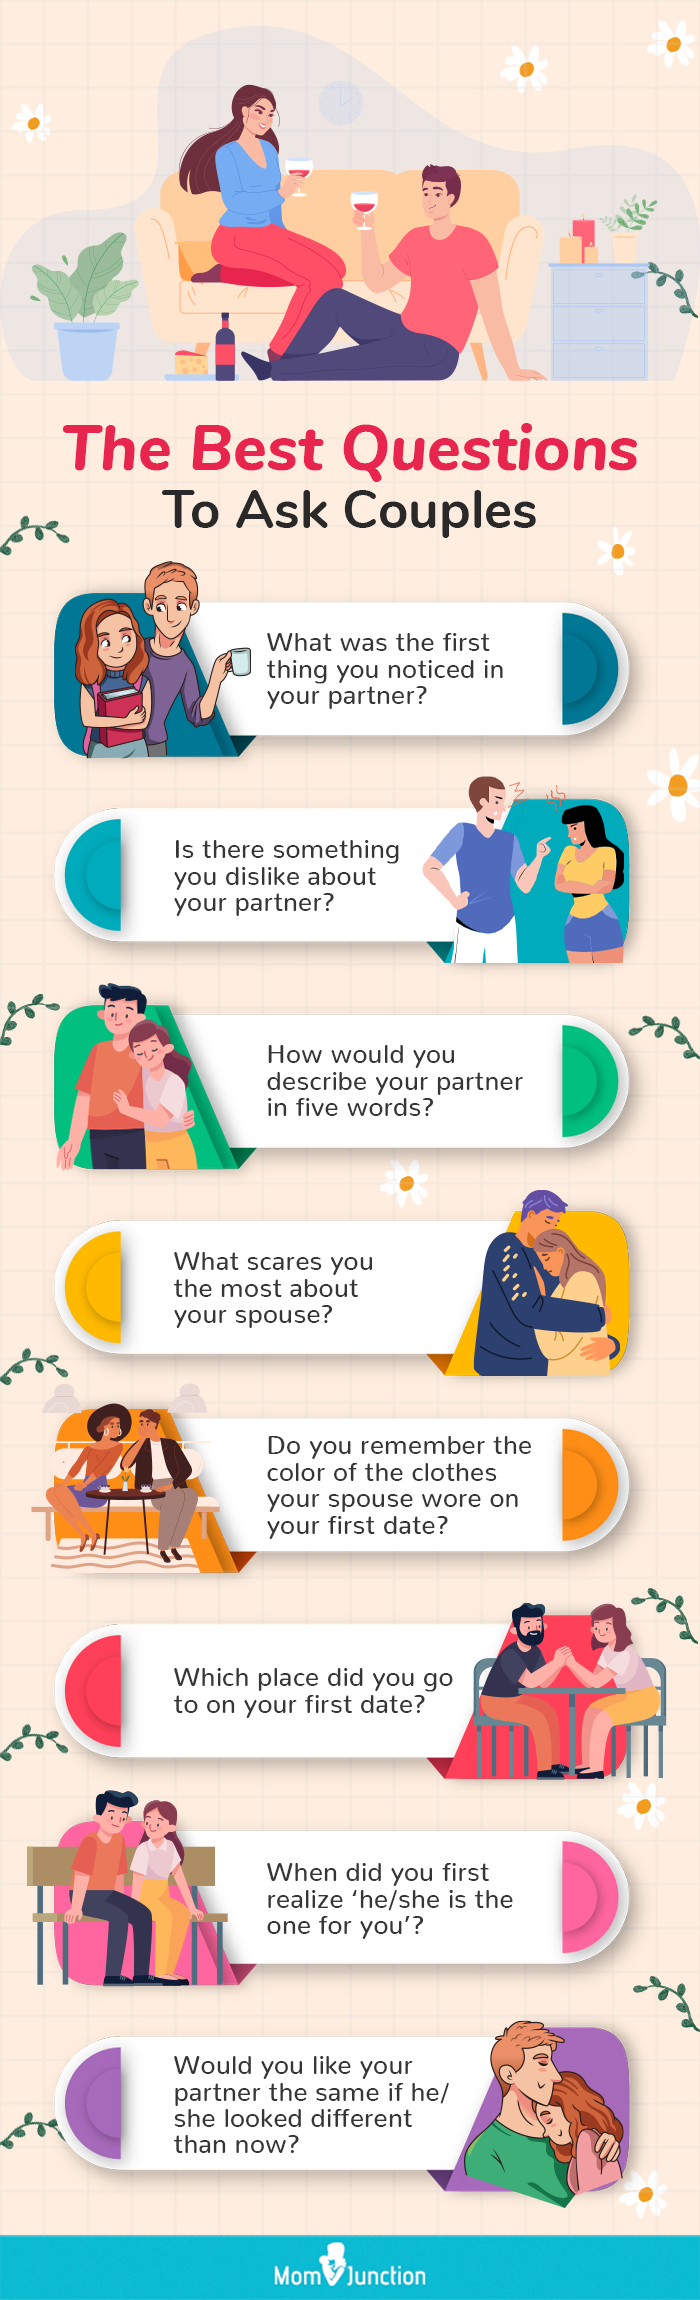 Game Night: Fun Games You Can Play as a Couple - Newlywed Survival